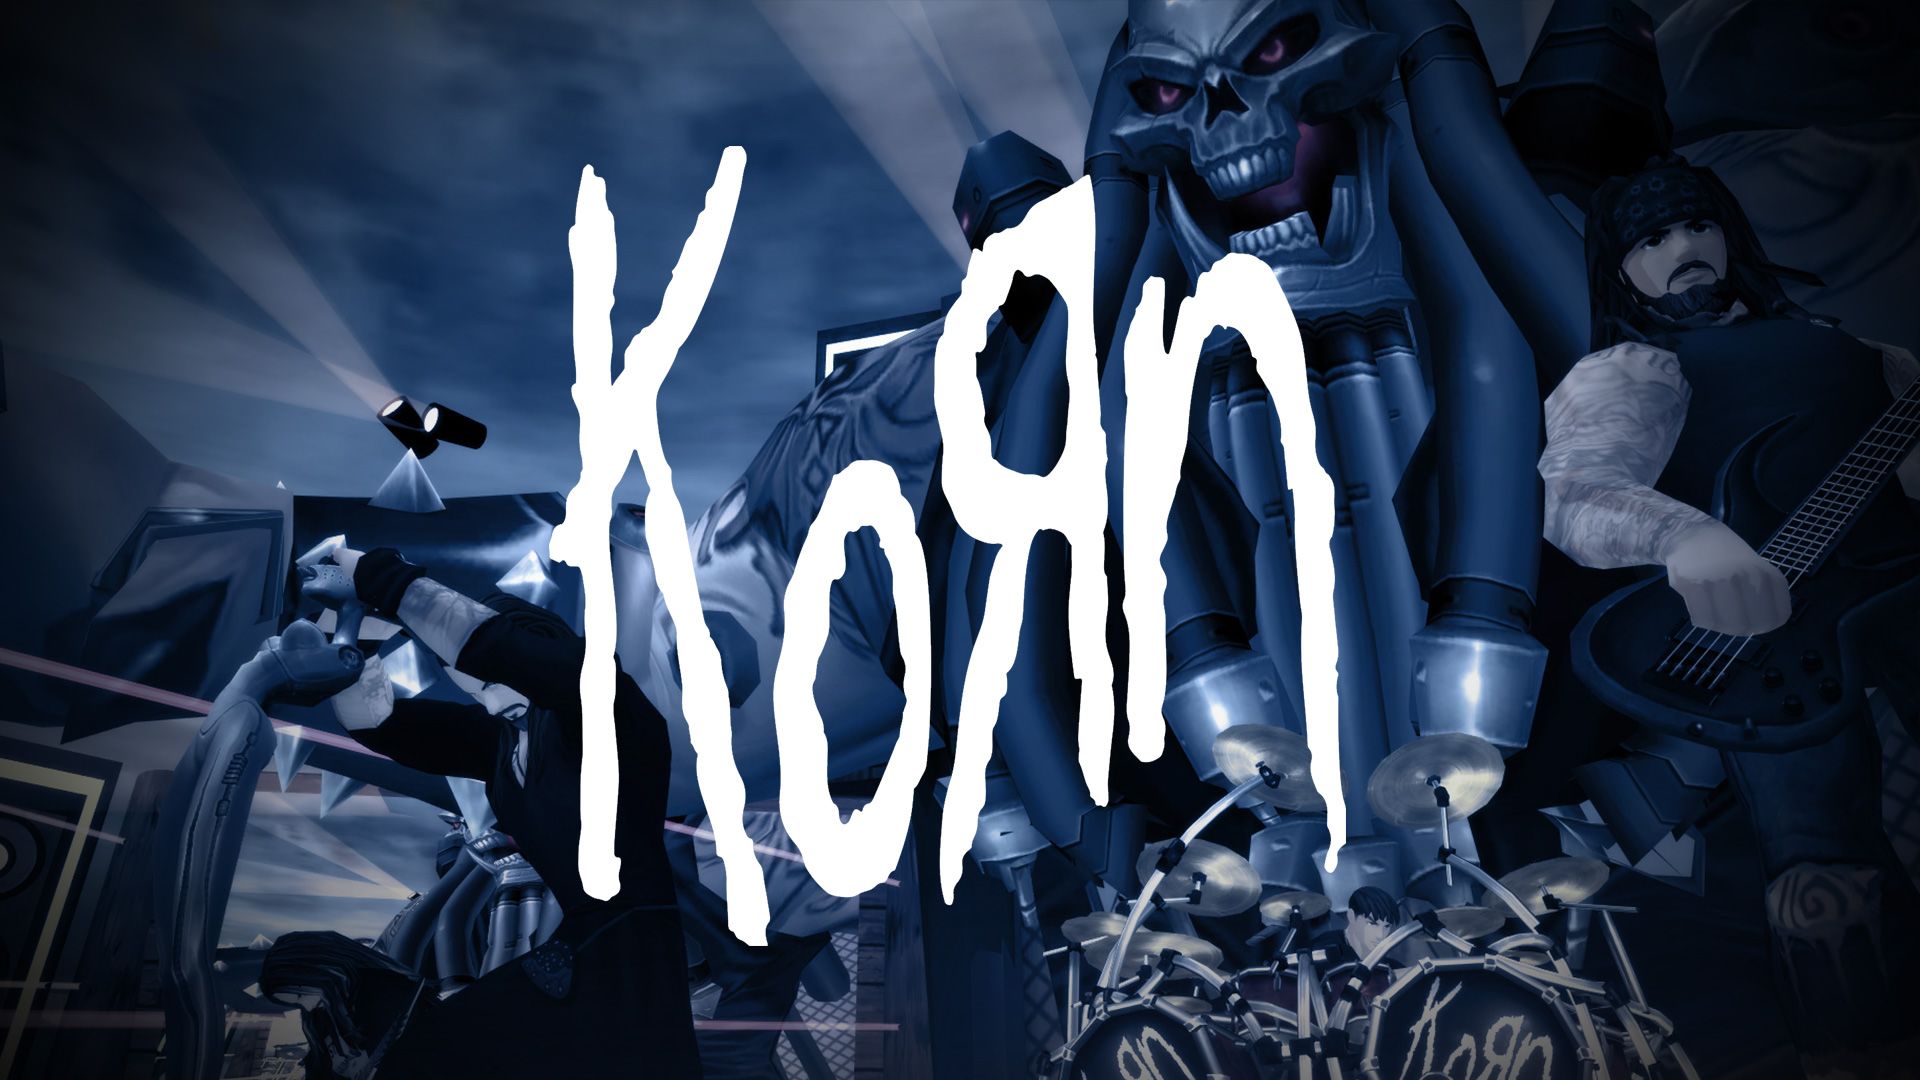 Korn as video game characters